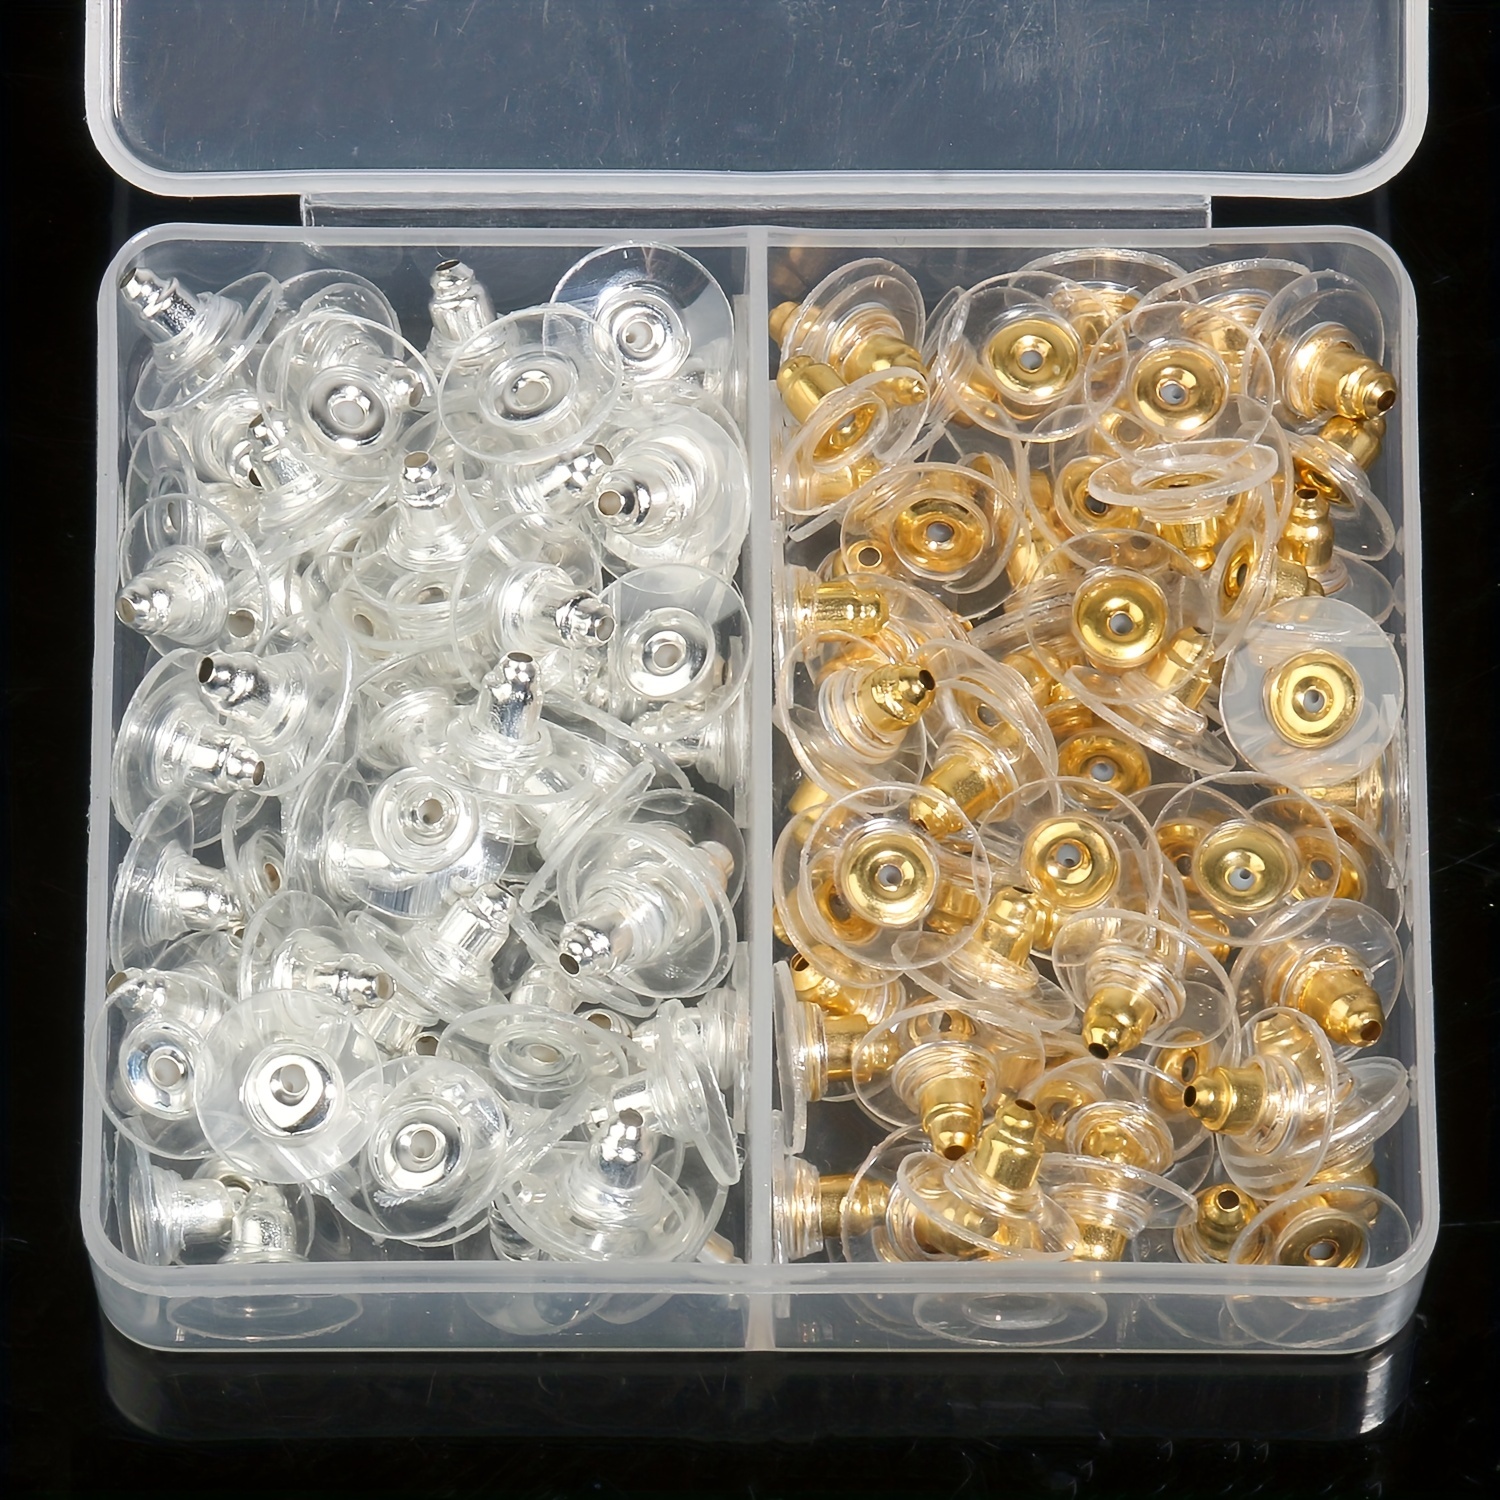 Nkwuire 12 Styles 600 Pcs Earring Backs for Studs, Clear Plastic Earrings  Hypoallergenic Metal Rubber Silicone Earring Backs Bullet Clutch Stoppers